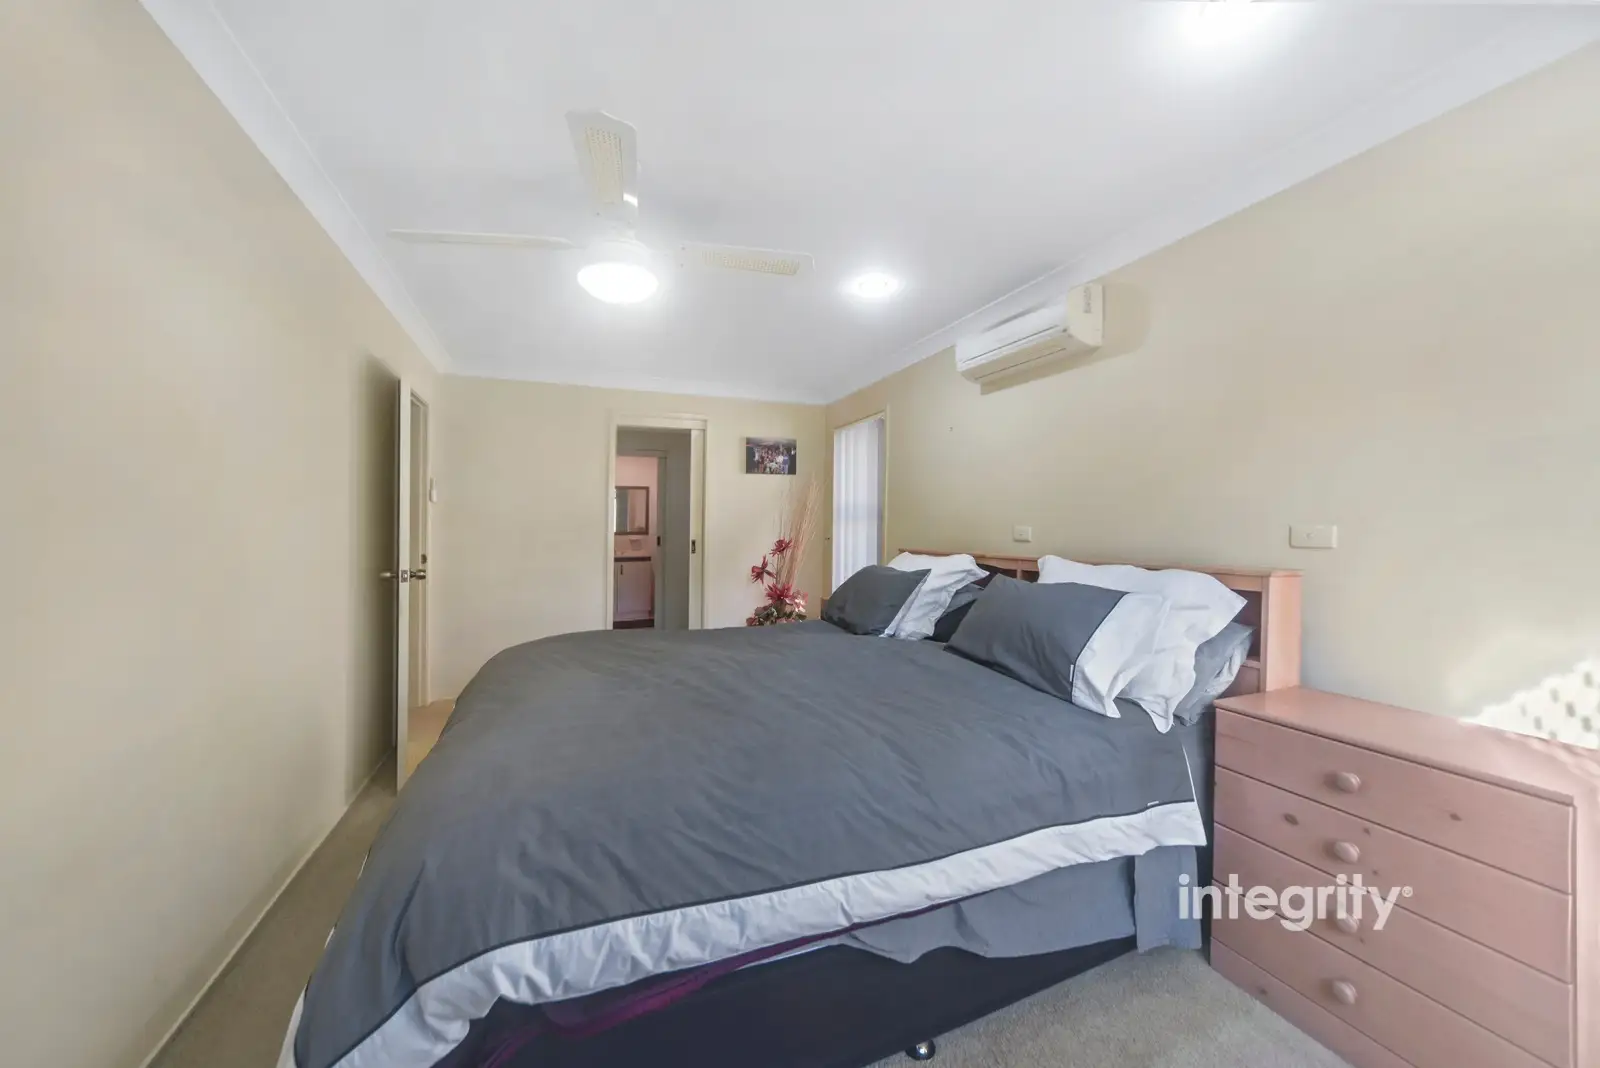 19 Jamieson Road, North Nowra For Sale by Integrity Real Estate - image 9